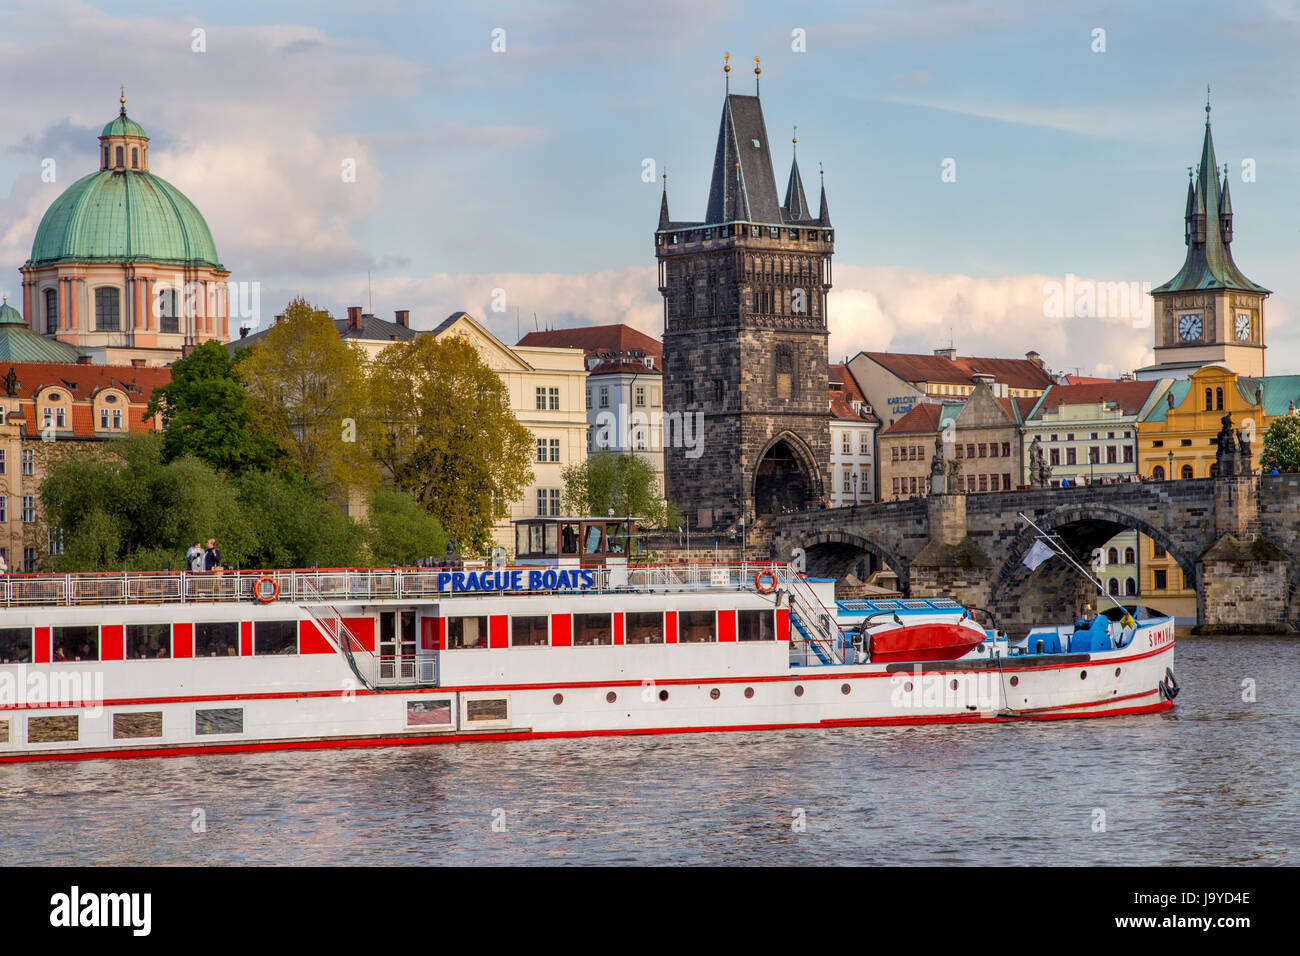 River cruise boat on the Vltava river in front of the Charles Bridge in Prague, Czech Republic Stock Photo